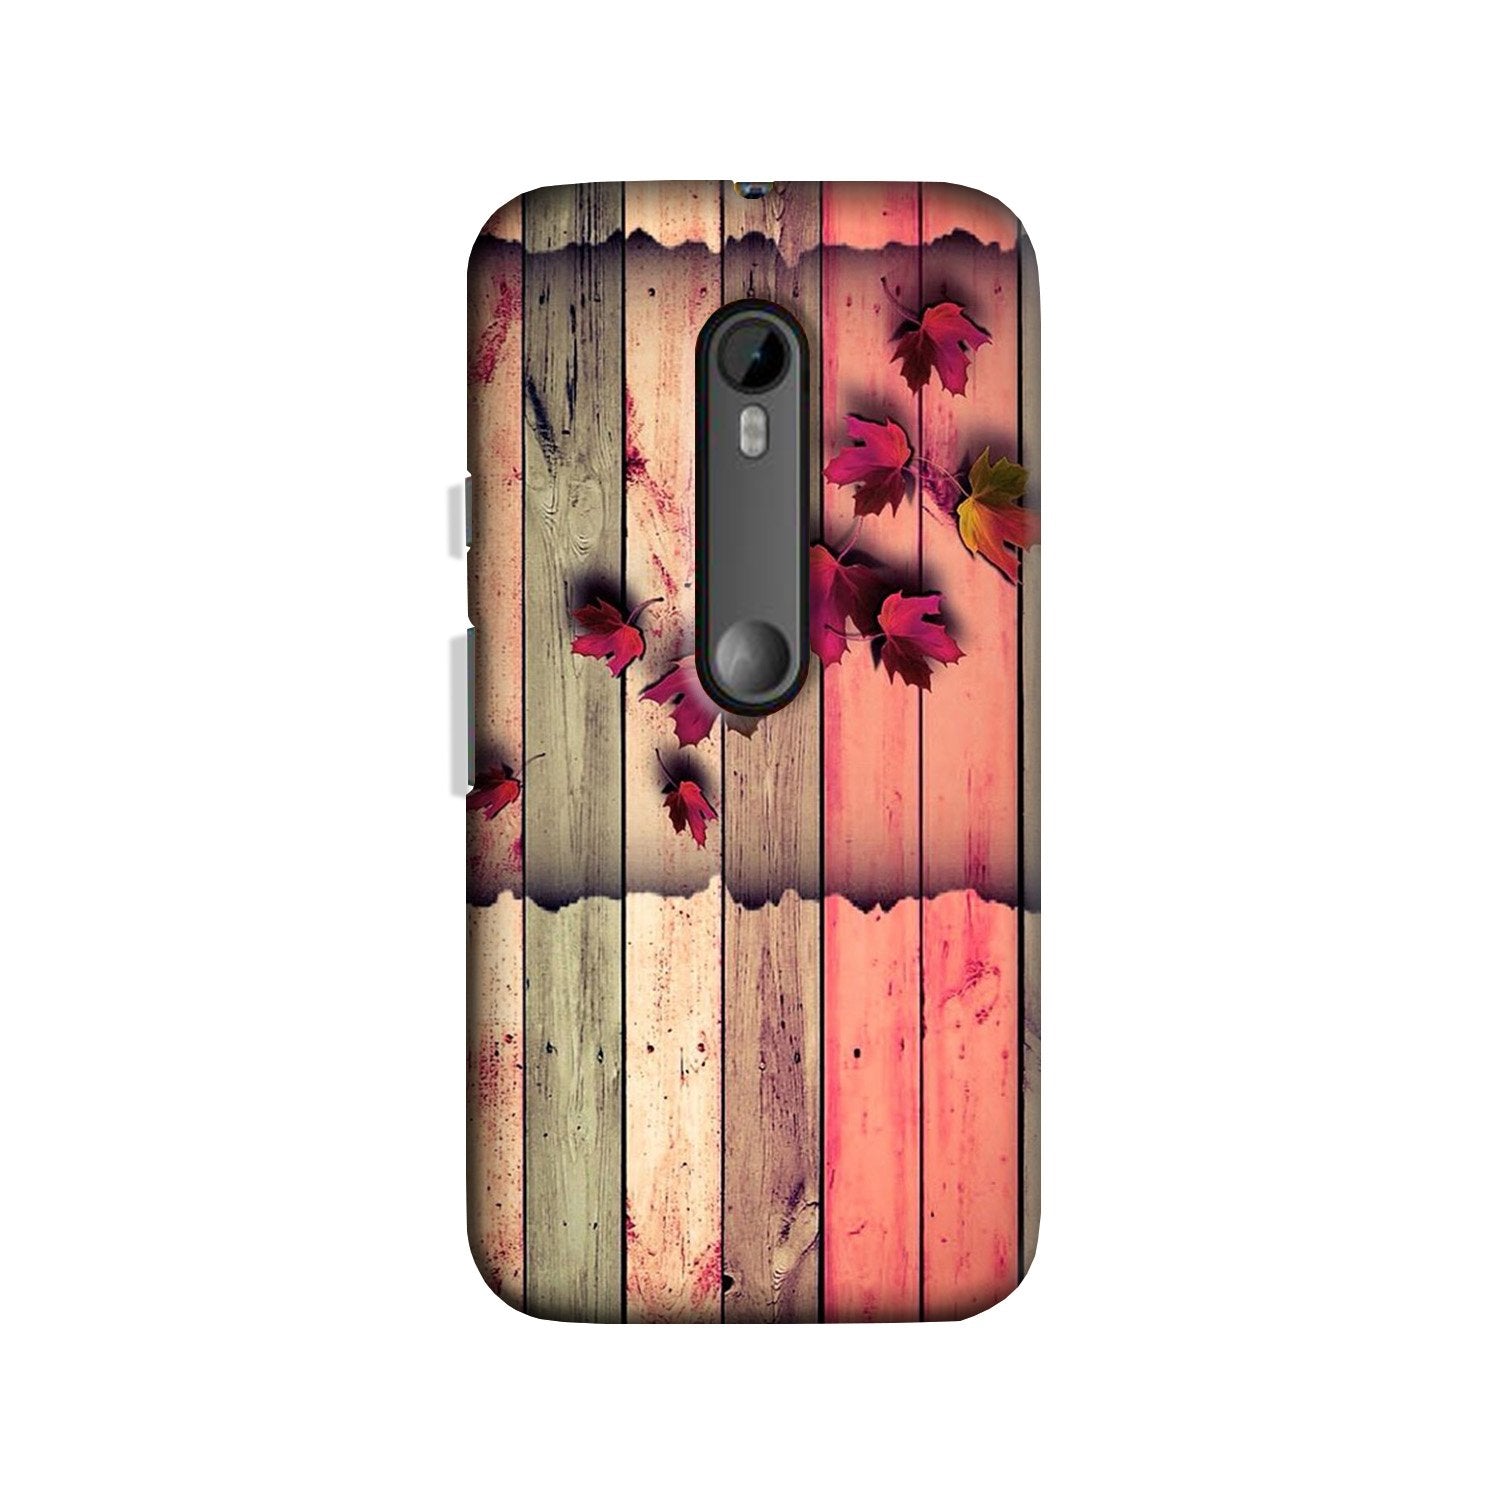 Wooden look2 Case for Moto X Play